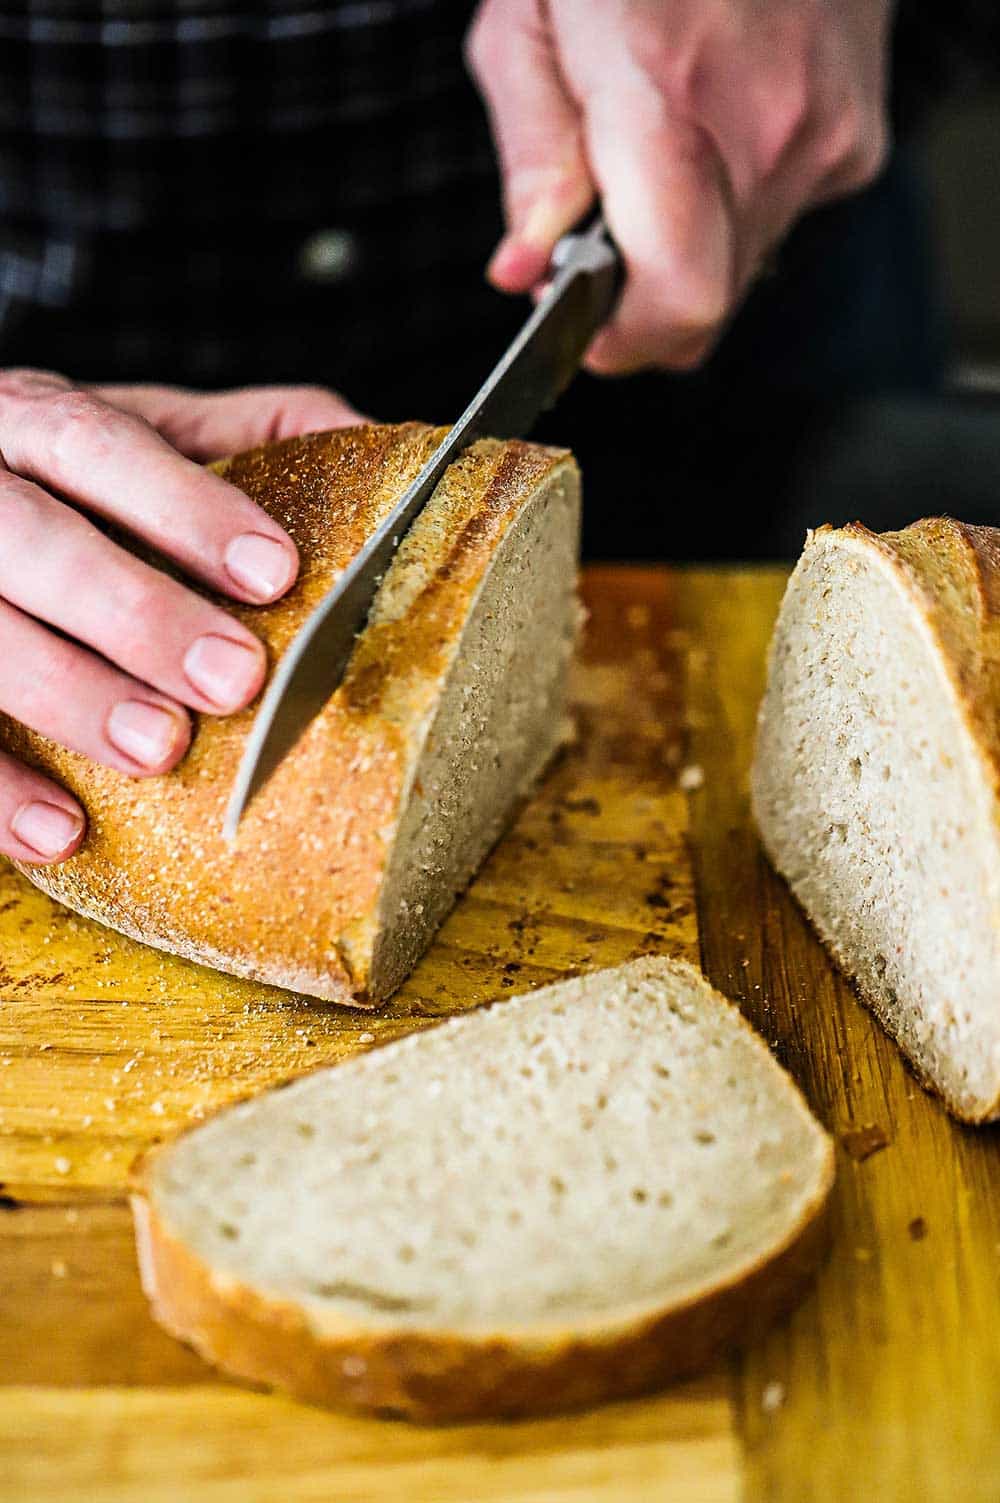 A person using a serrated knife to cut slices from Jewish rye bread on a wooden cutting board. 